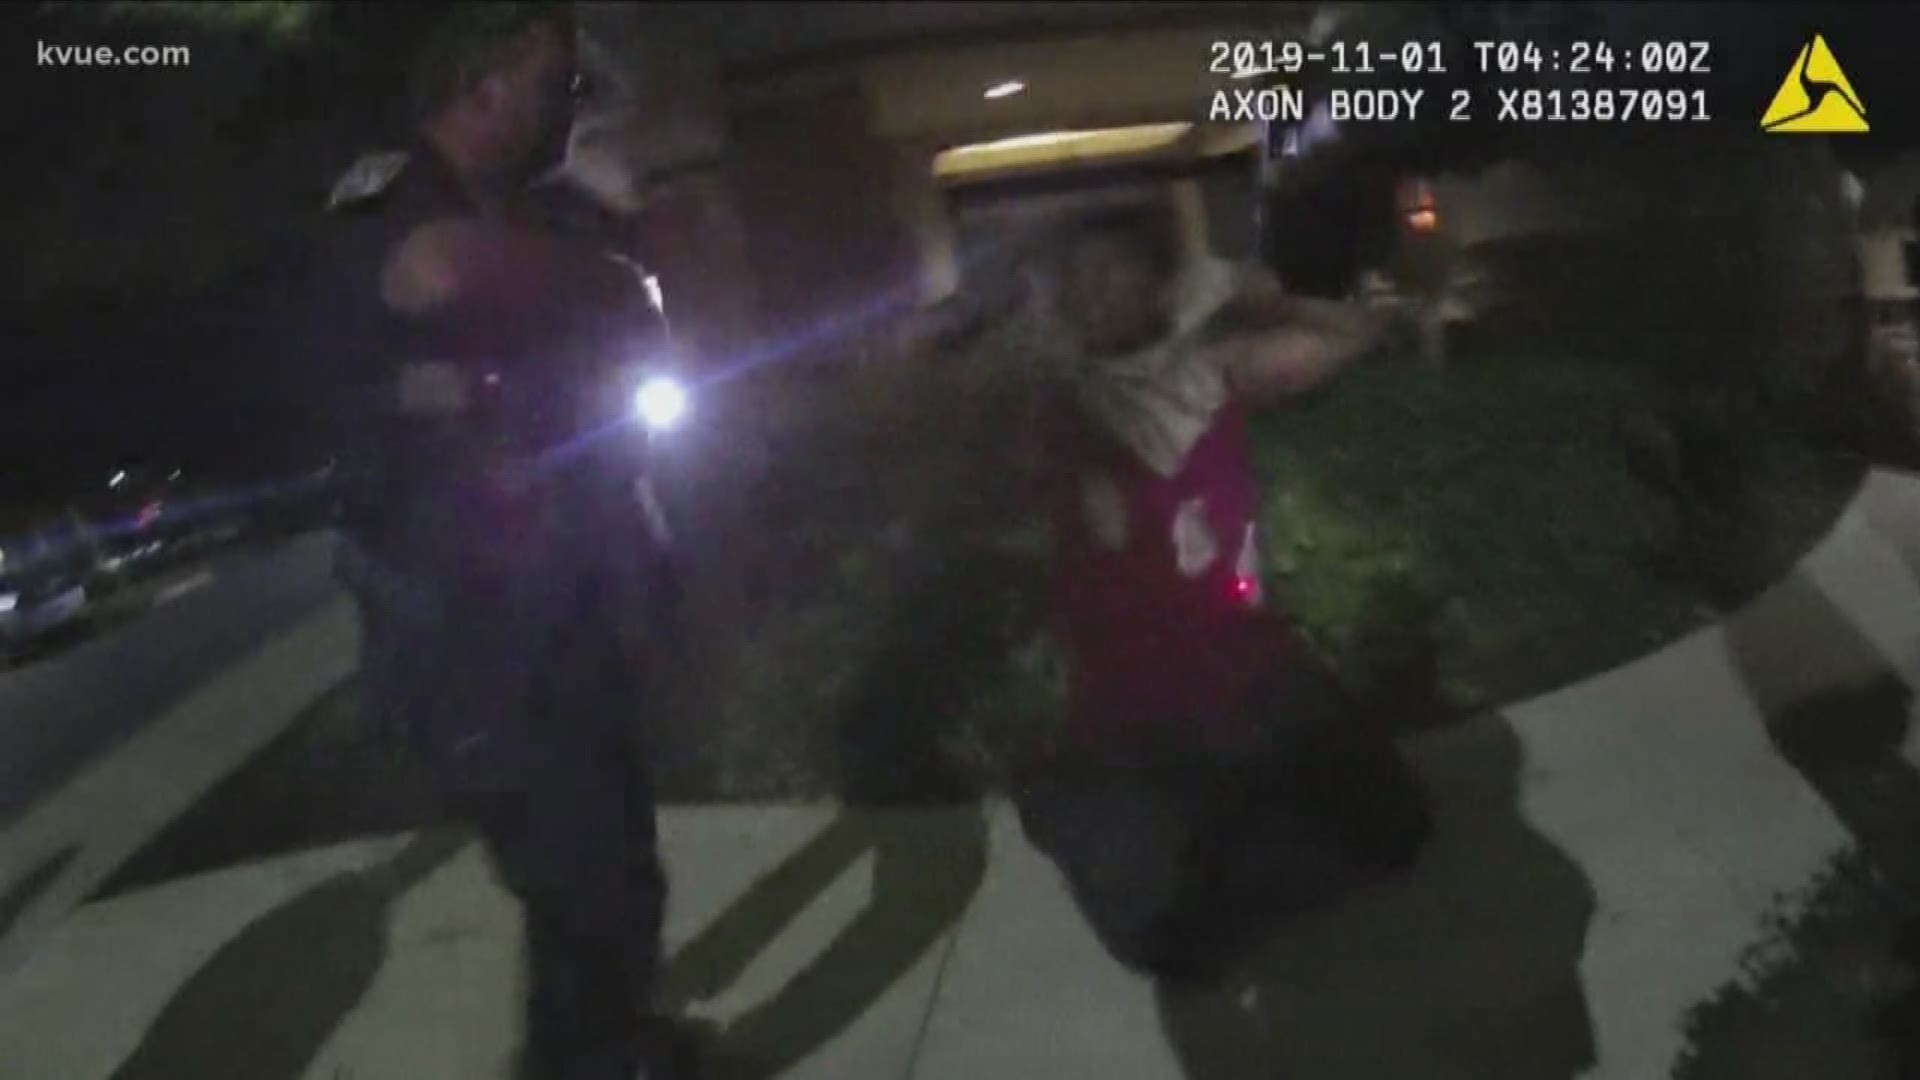 Video of the arrest is spreading on social media, questioning the officers' actions.